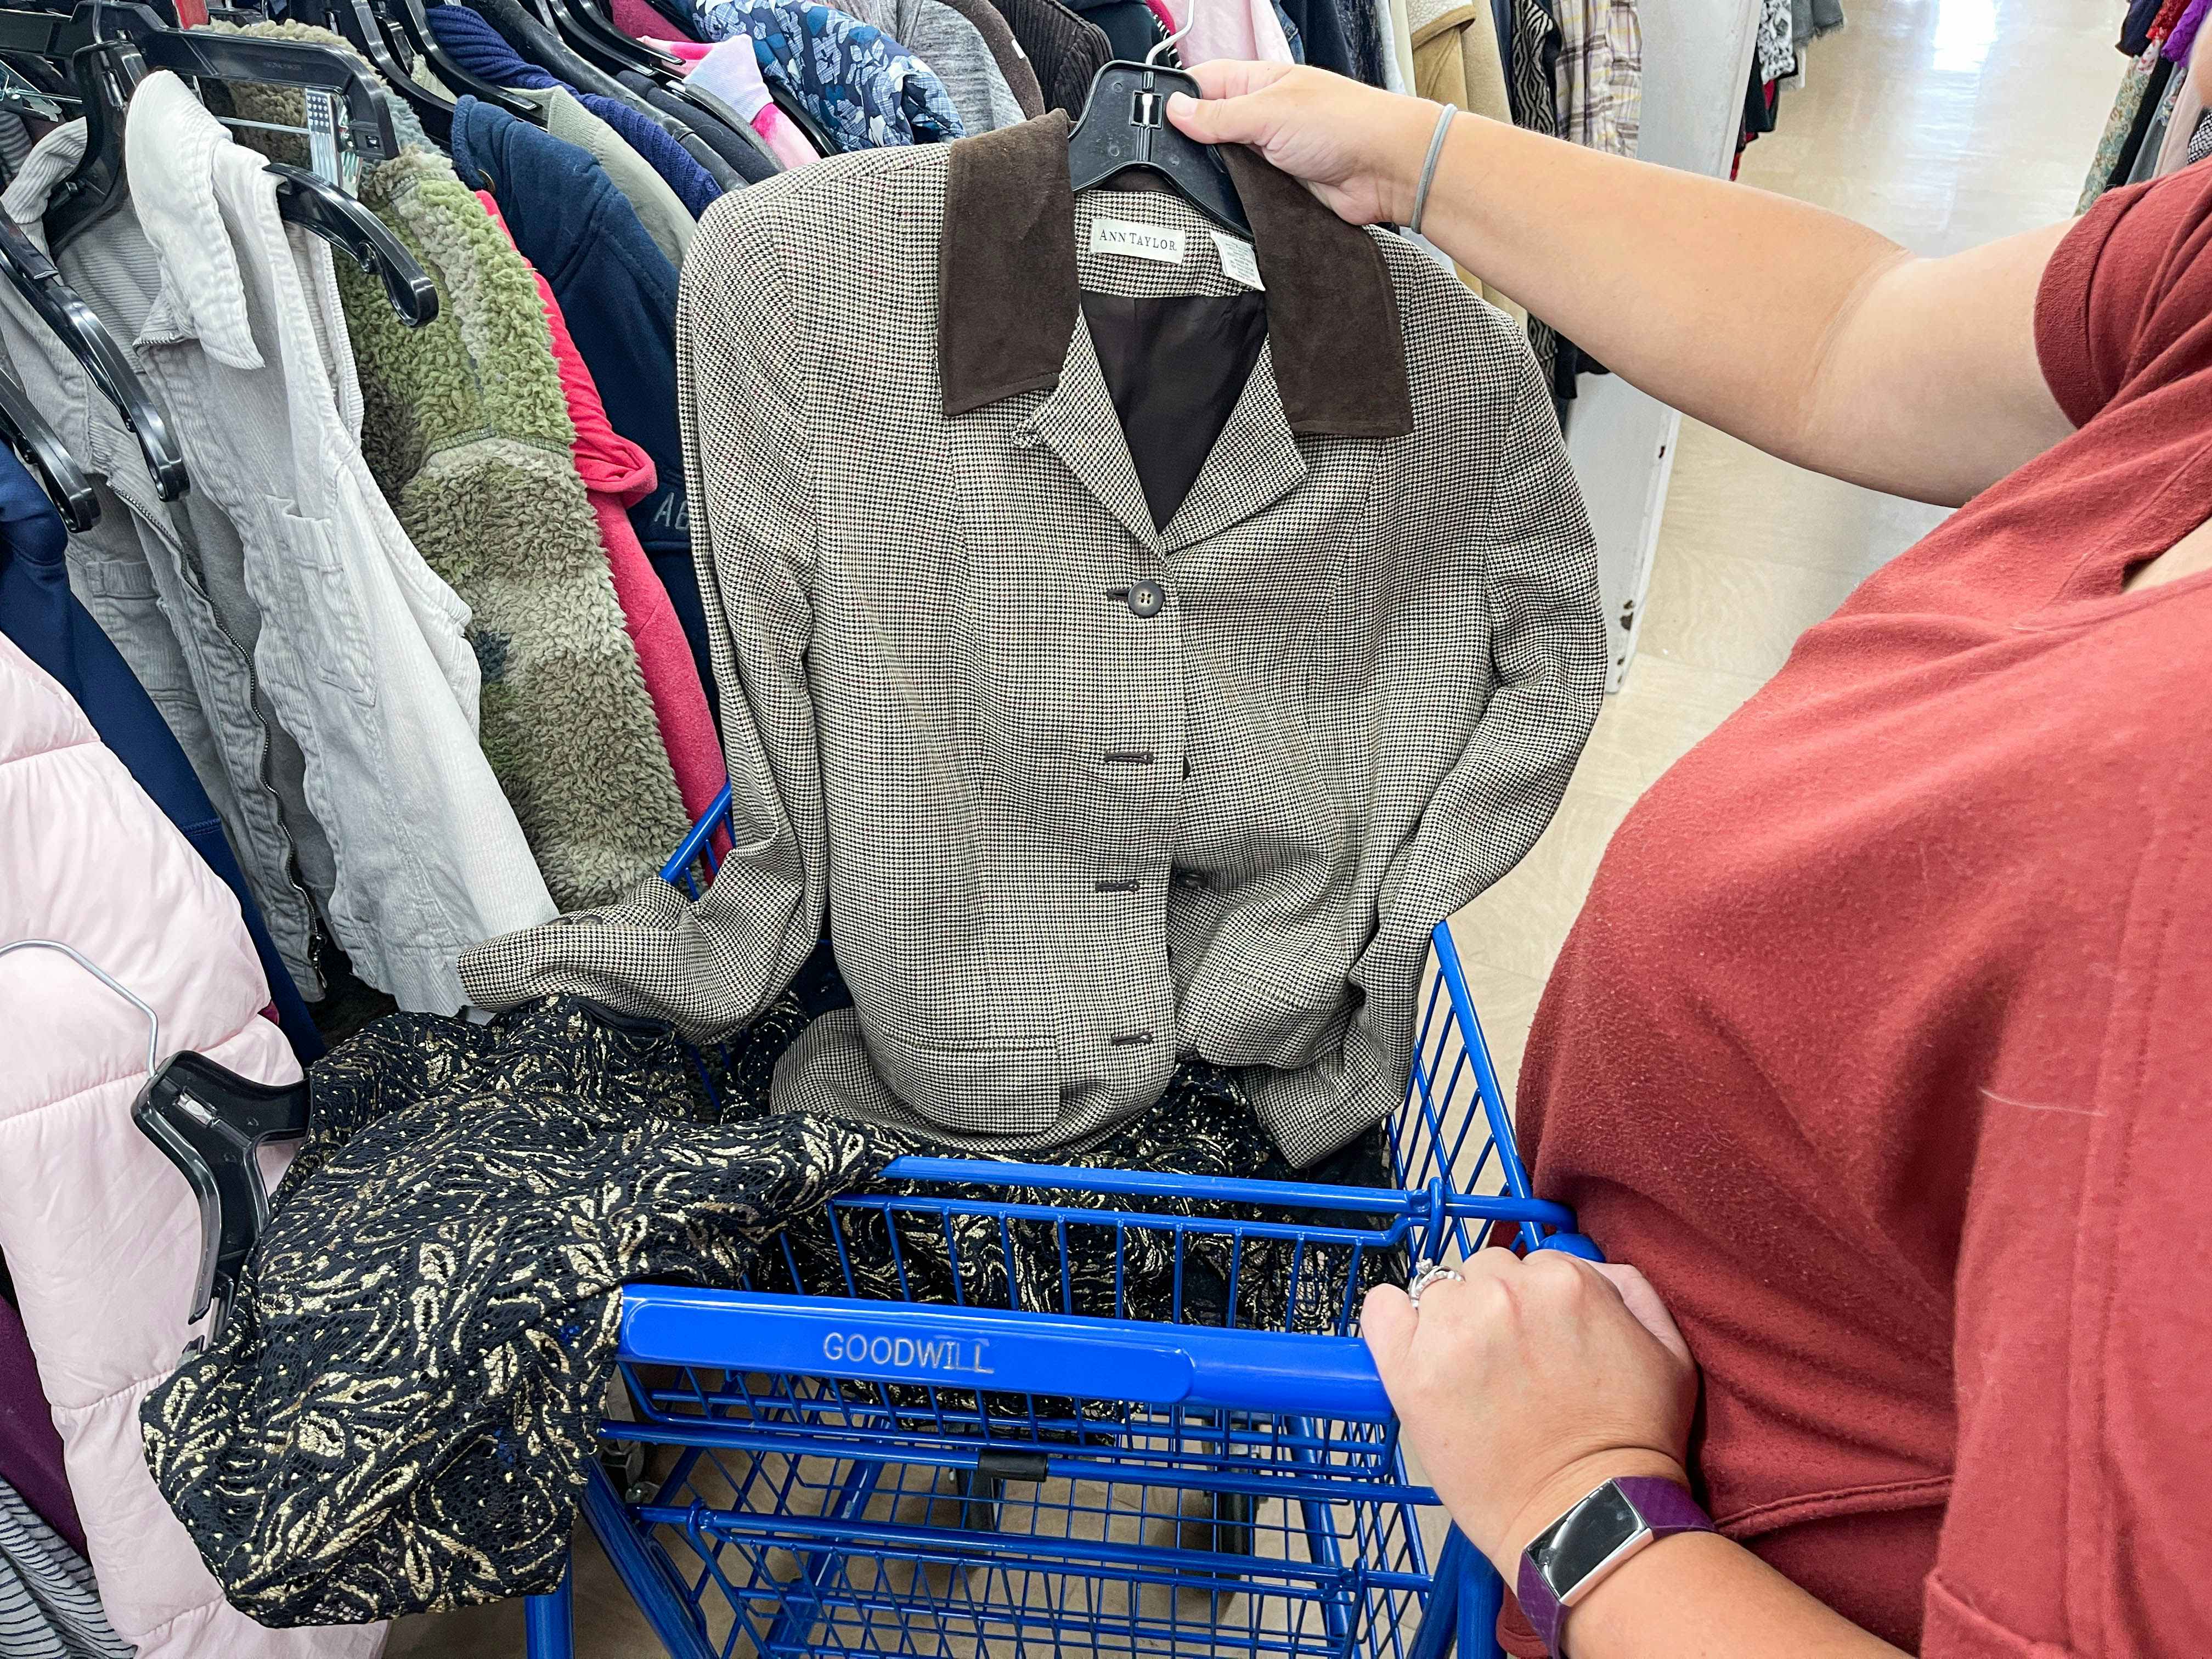 How to Thrift: 33 Thrift Store Hacks, Including the Cheapest